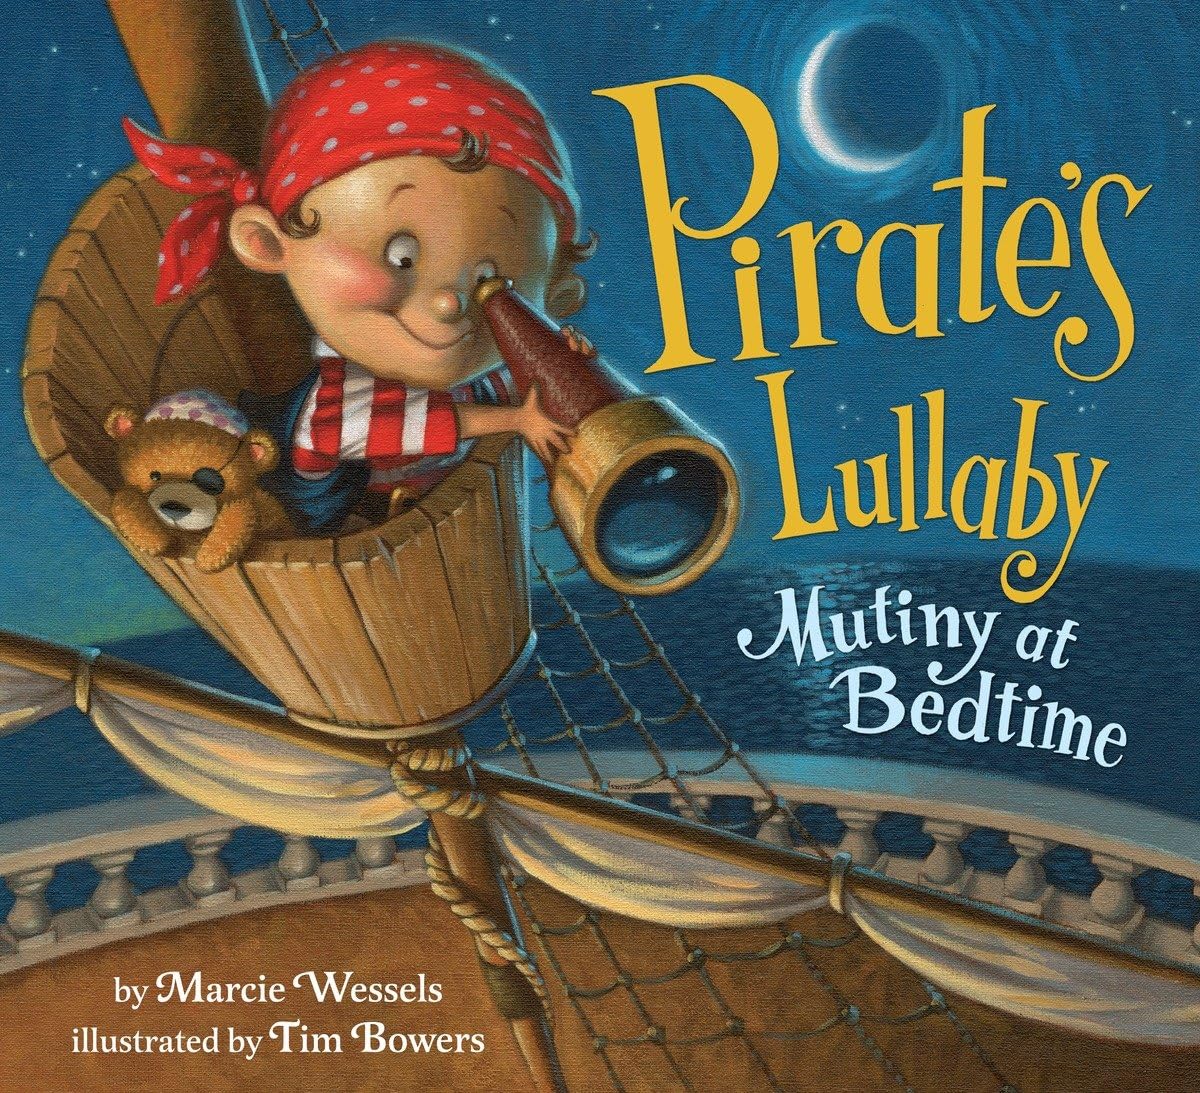 Pirate's Lullaby: Mutiny at Bedtime